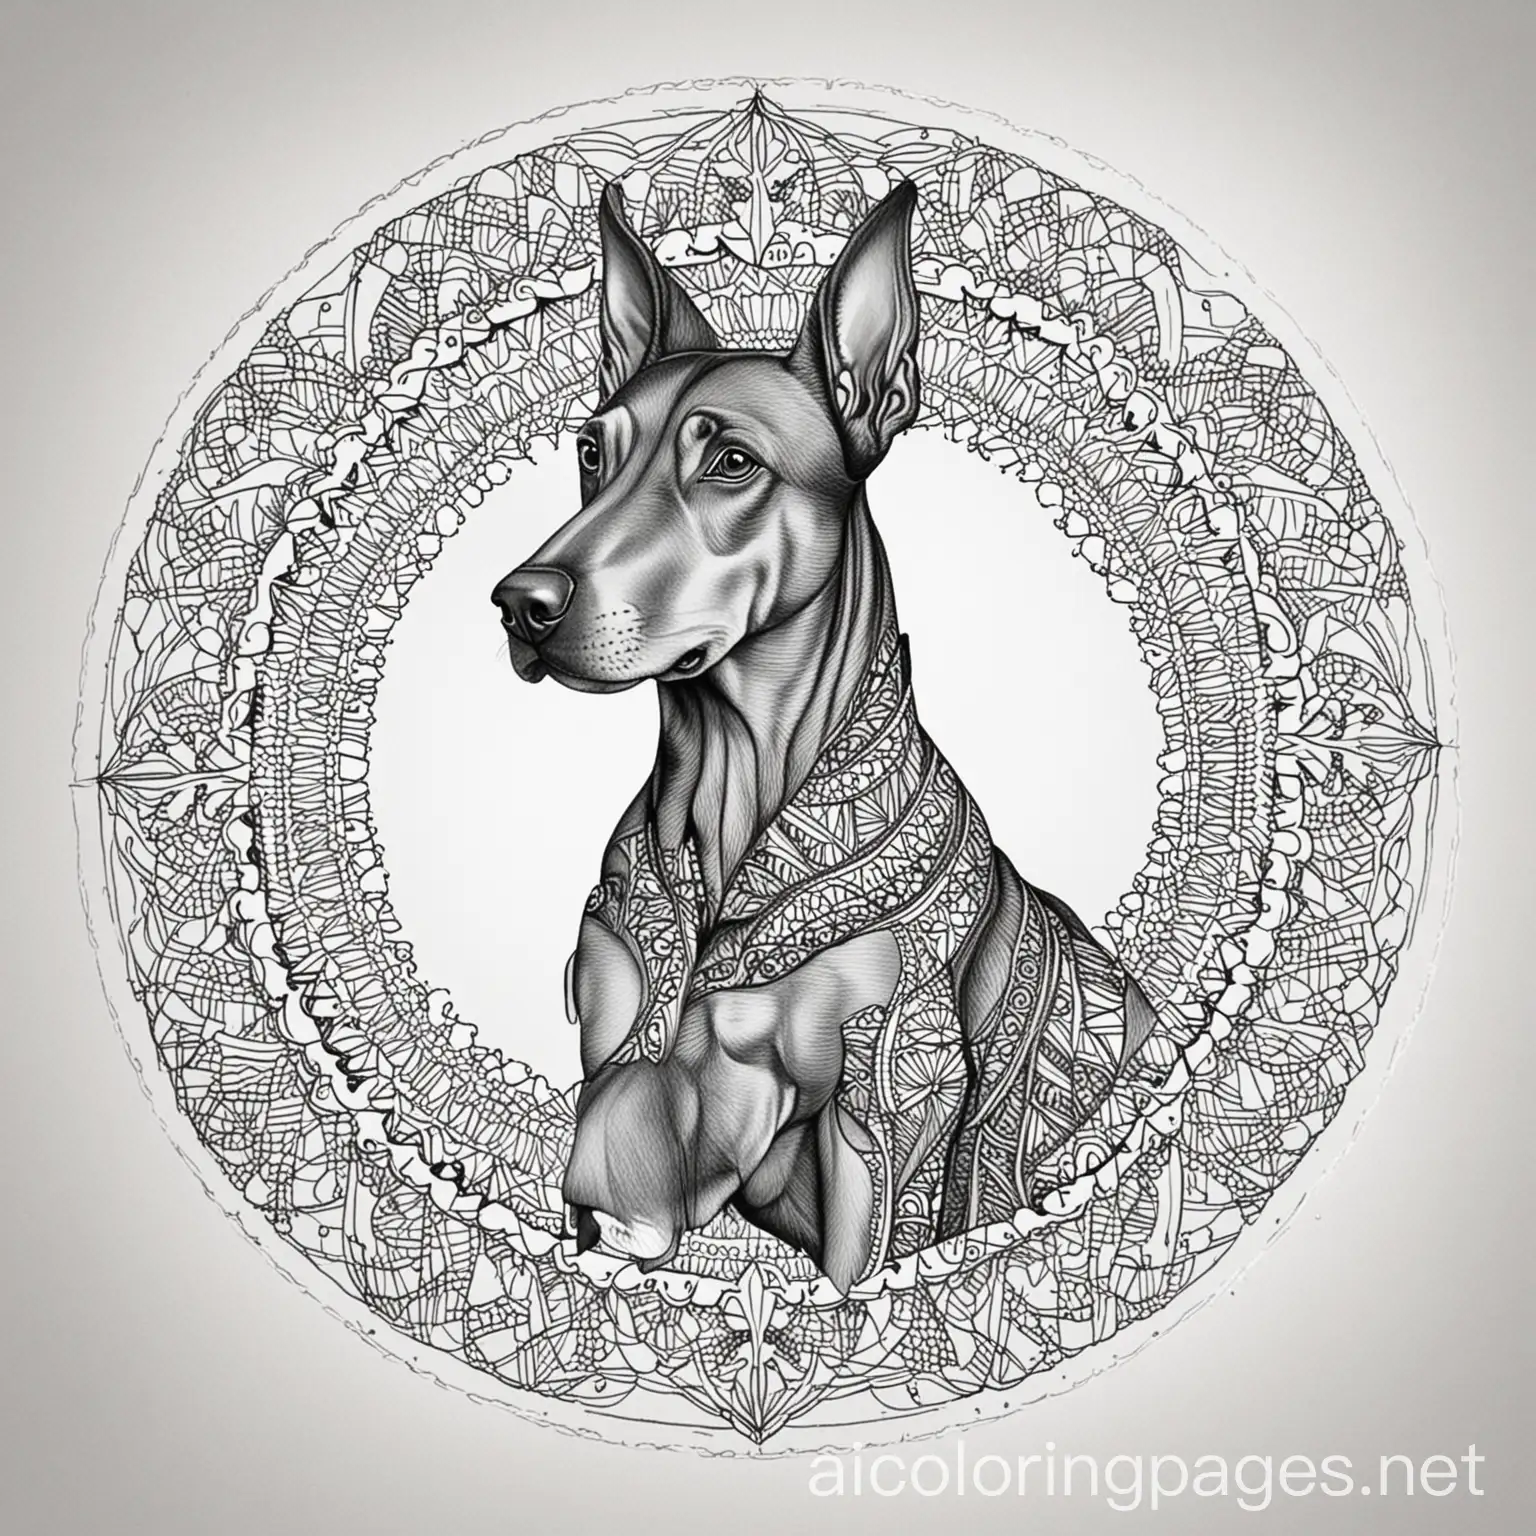 Dobermann-Mandala-Coloring-Page-Intricate-Line-Art-for-Relaxing-Creativity